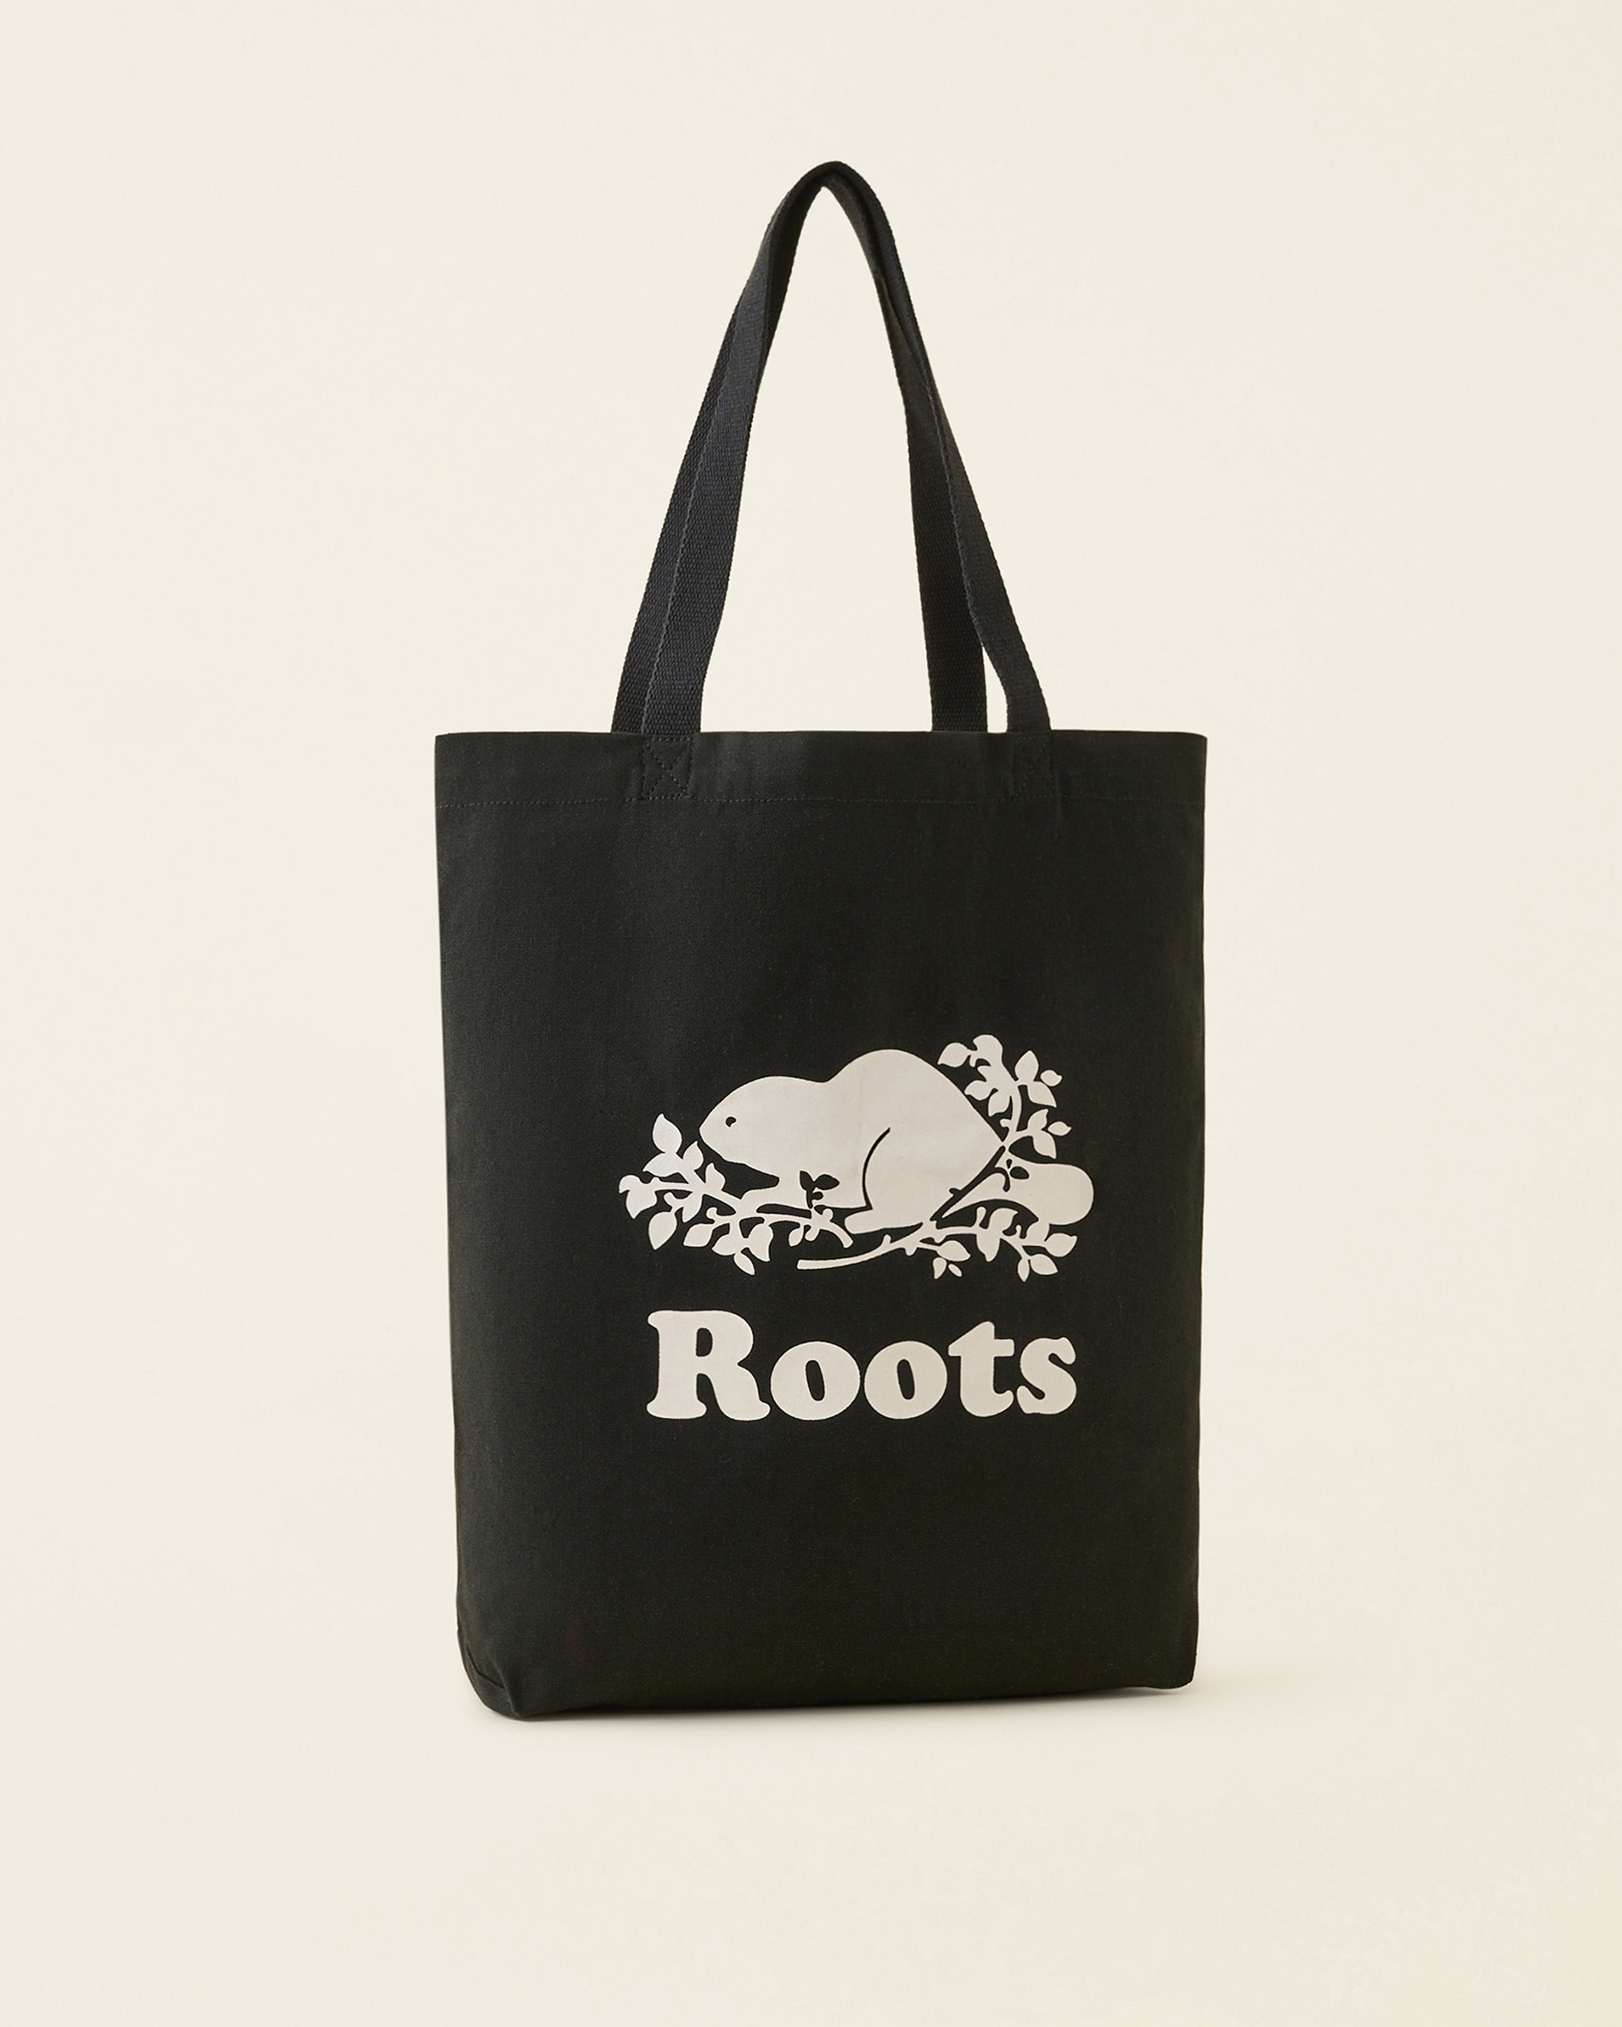 Roots Cooper Tote in Black